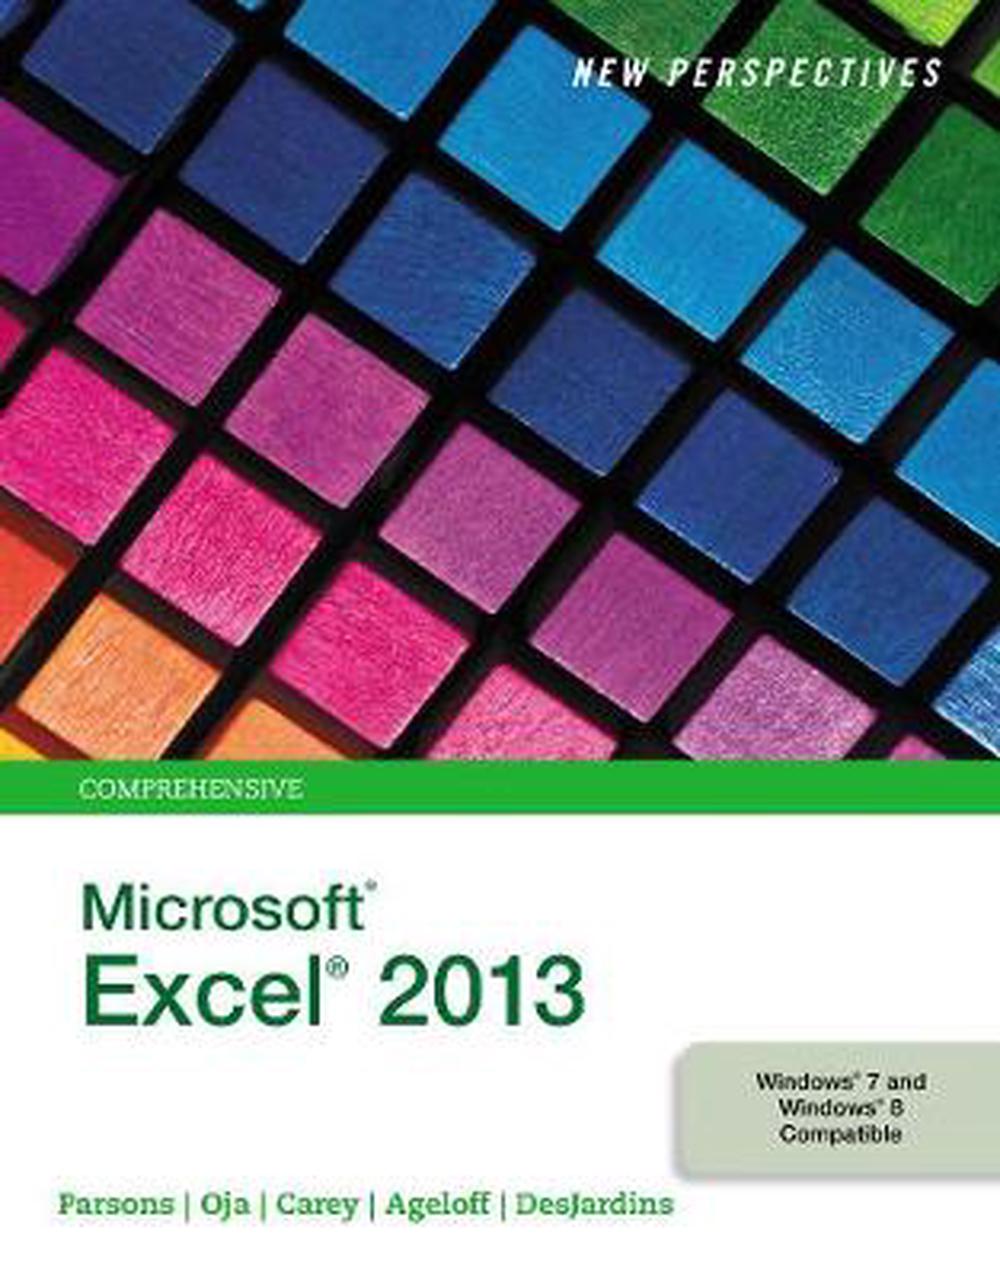 New Perspectives on Microsoft Excel 2013 Comprehensive by June Jamrich Parsons 9781285169330 eBay